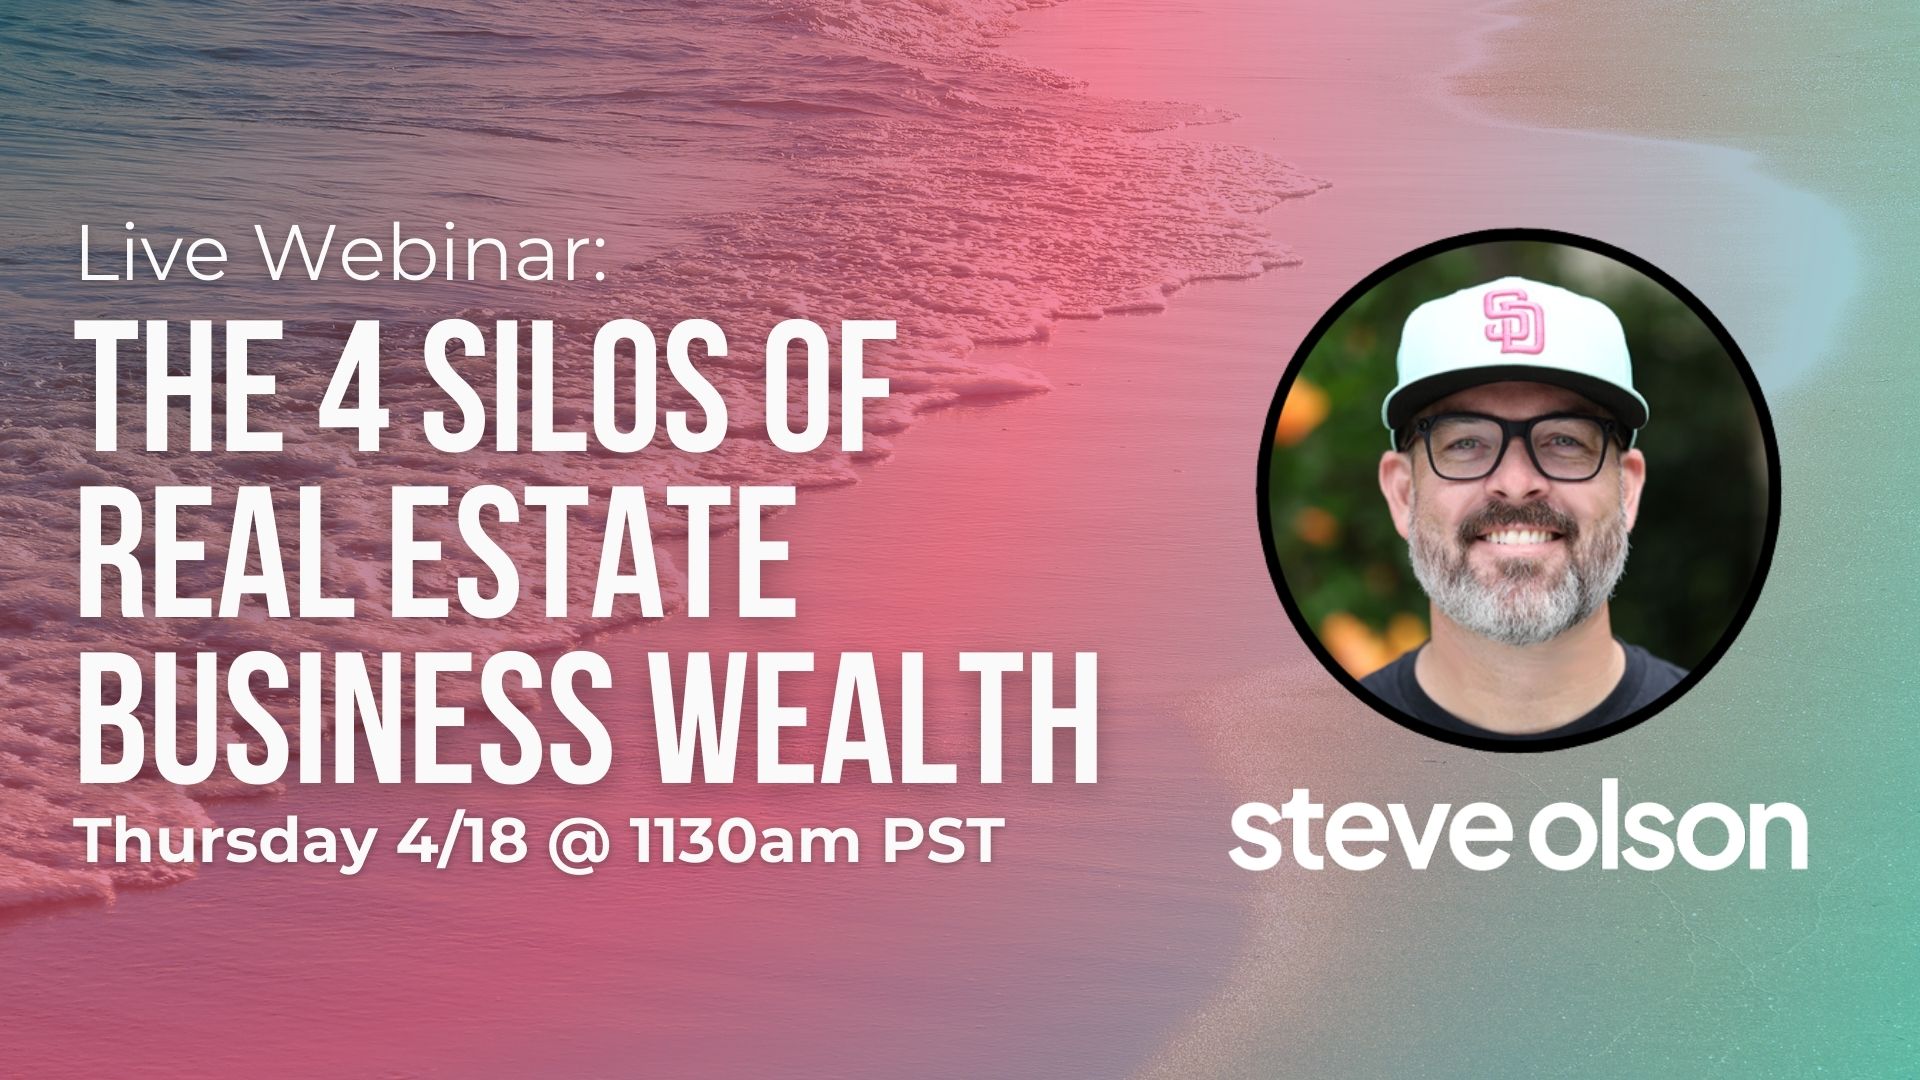 Webinar - The 4 Silos of Real Estate Business Wealth